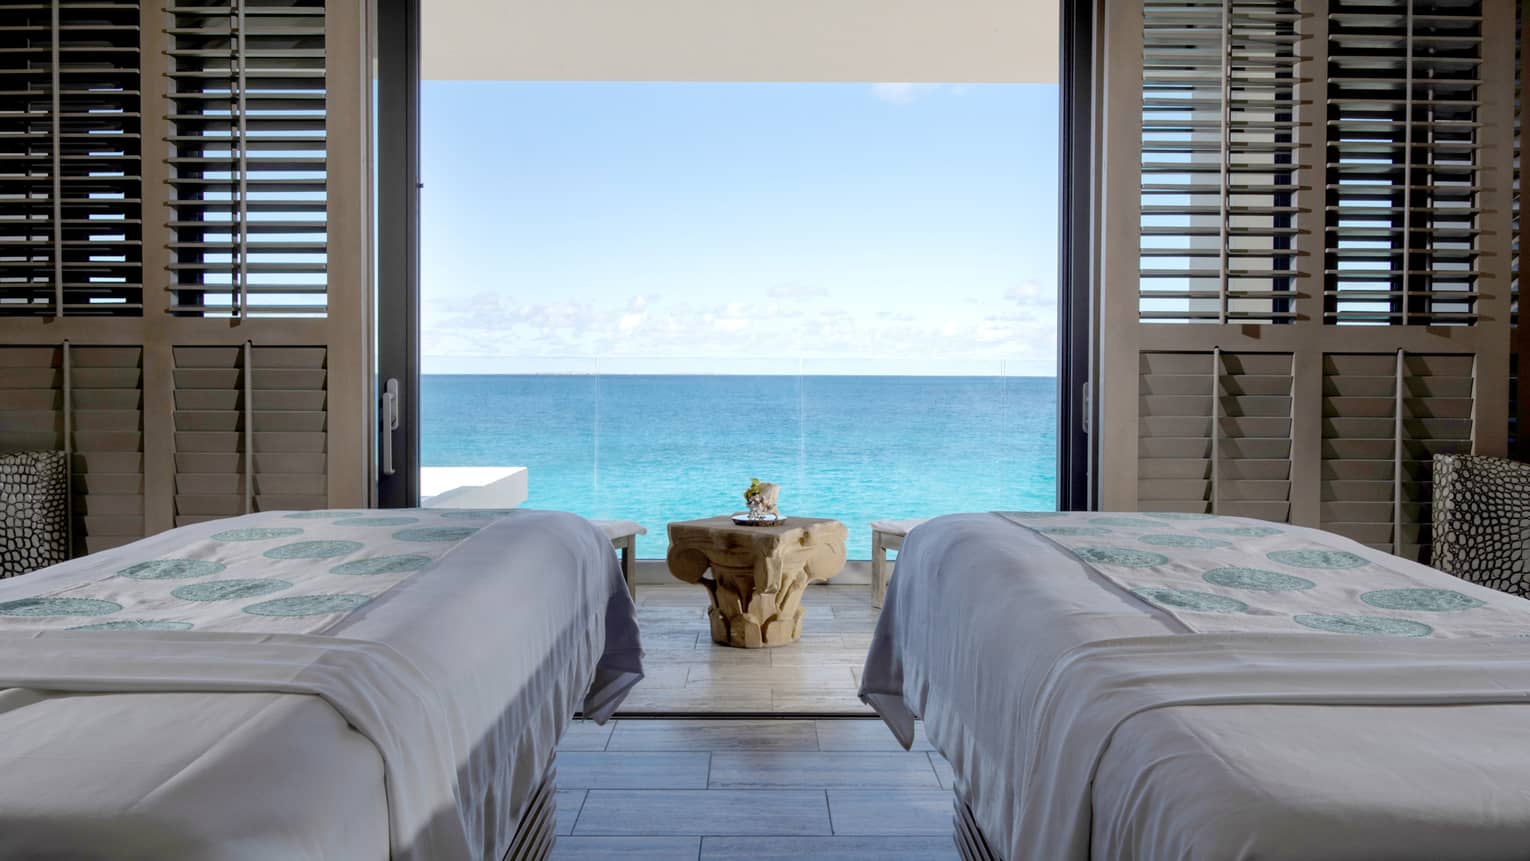 Couples massage beds in private spa cabana looking out at the ocean